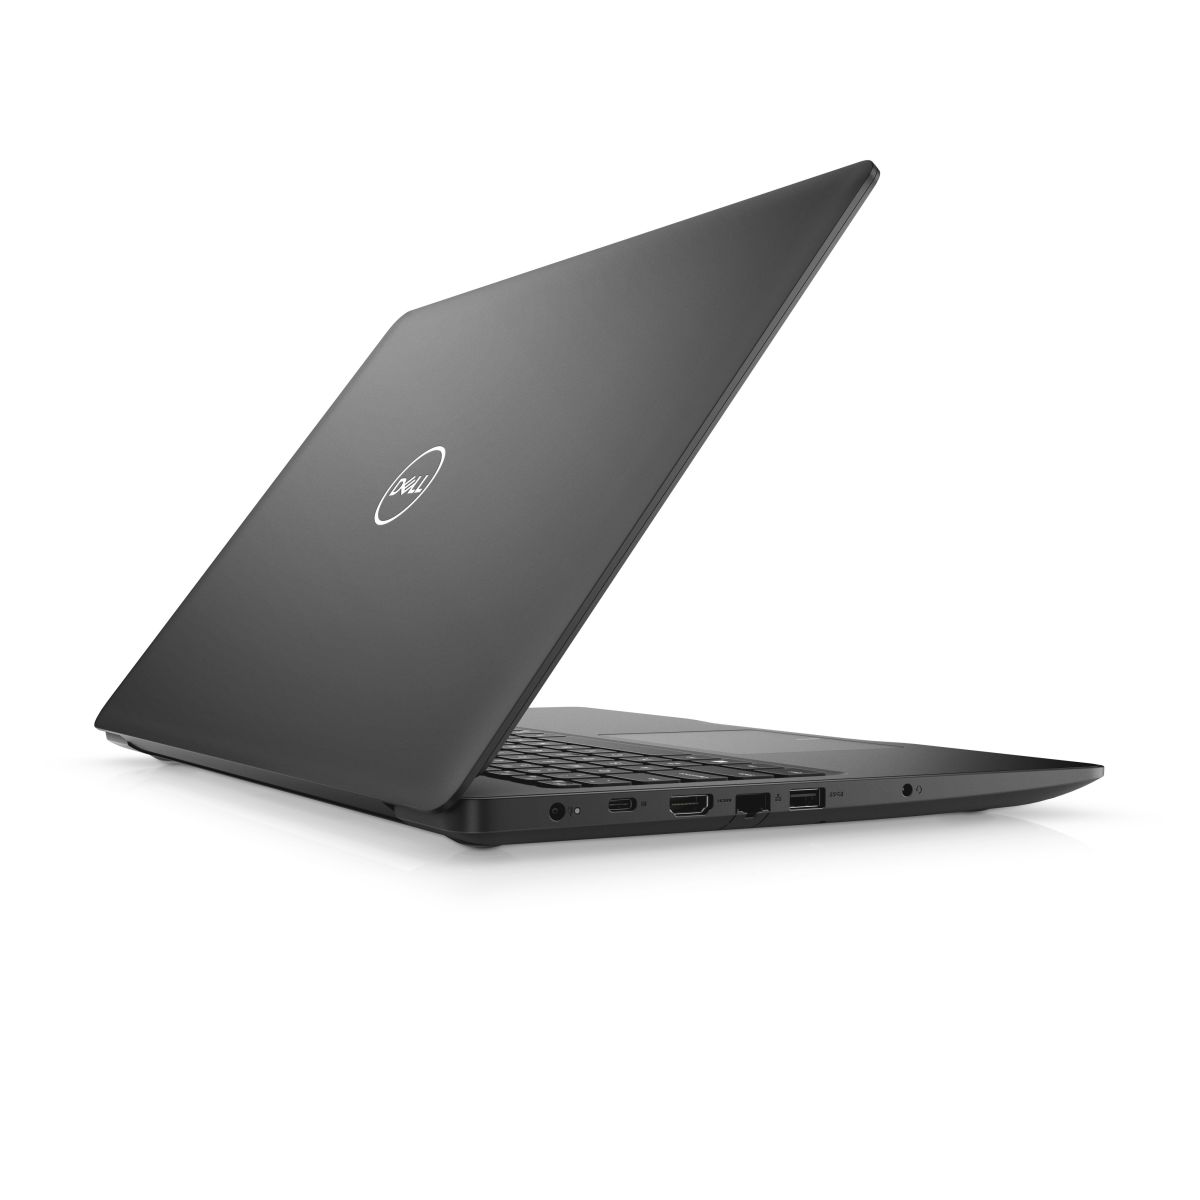 DELL Latitude 3590 - 23N6T laptop specifications